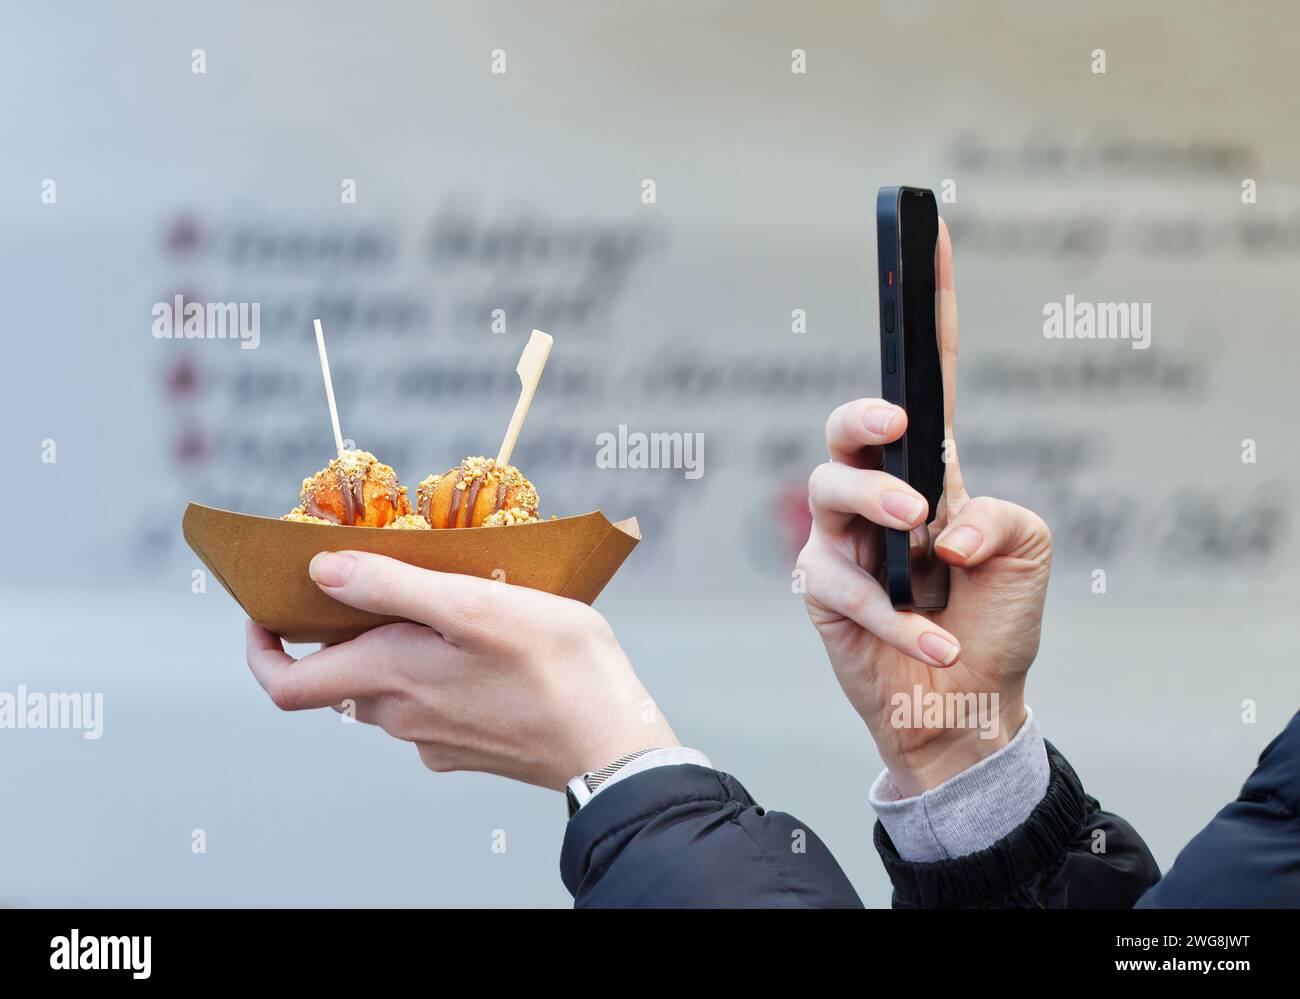 Womans hands holding dessert and mobile phone, midsection of womans body taking selfie of dessert with copy space, farmers street food market at Pragu Stock Photo